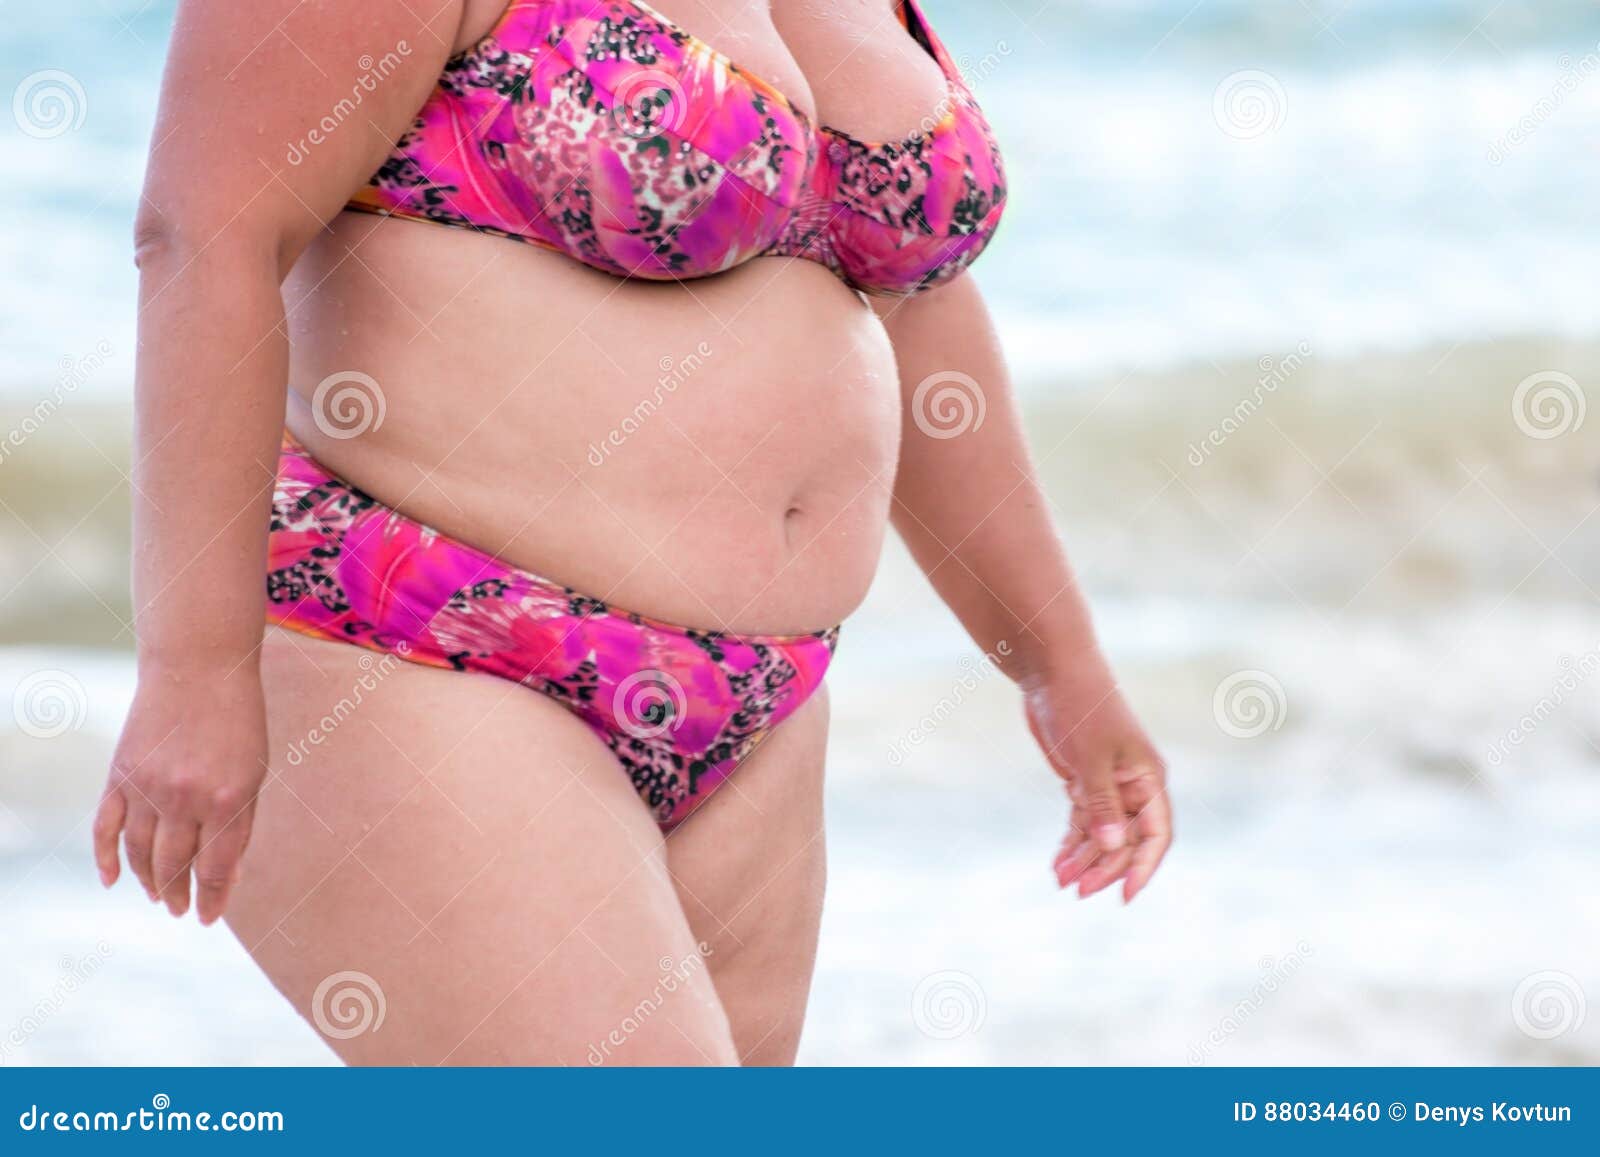 515 Obese Woman Swimsuit Stock Photos hq nude image